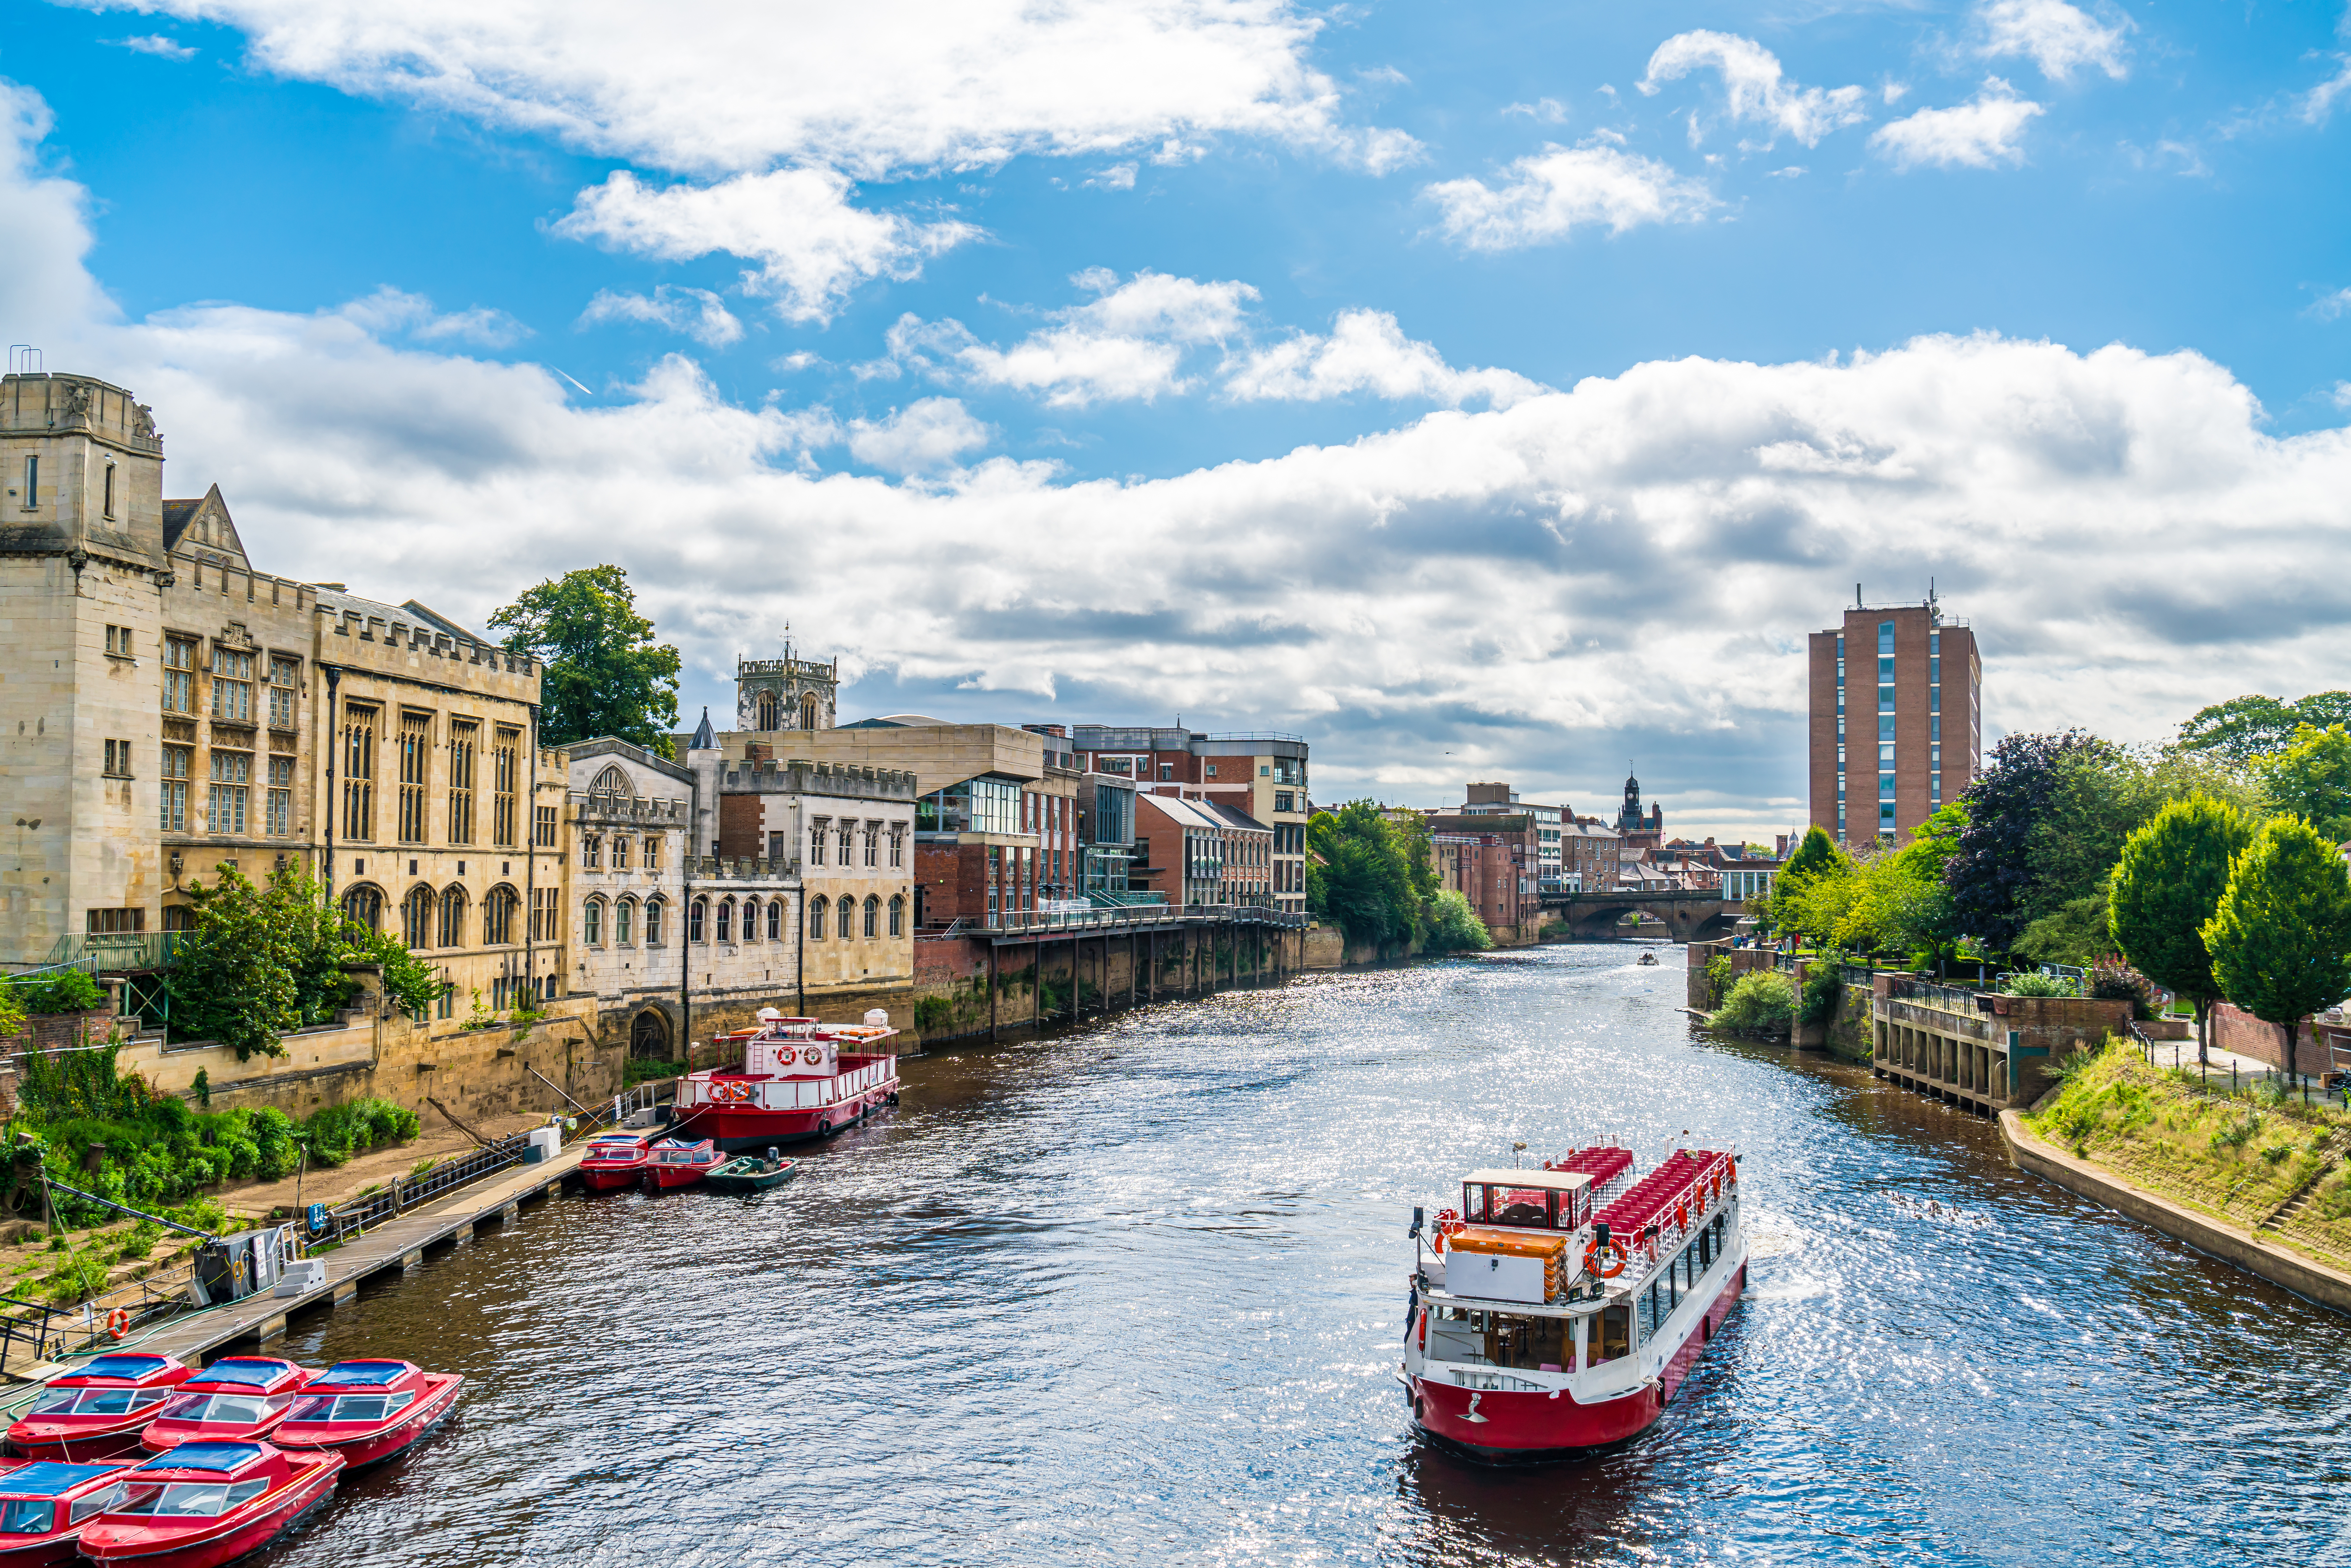 City Cruises boat on the river ouse in York, aerial view